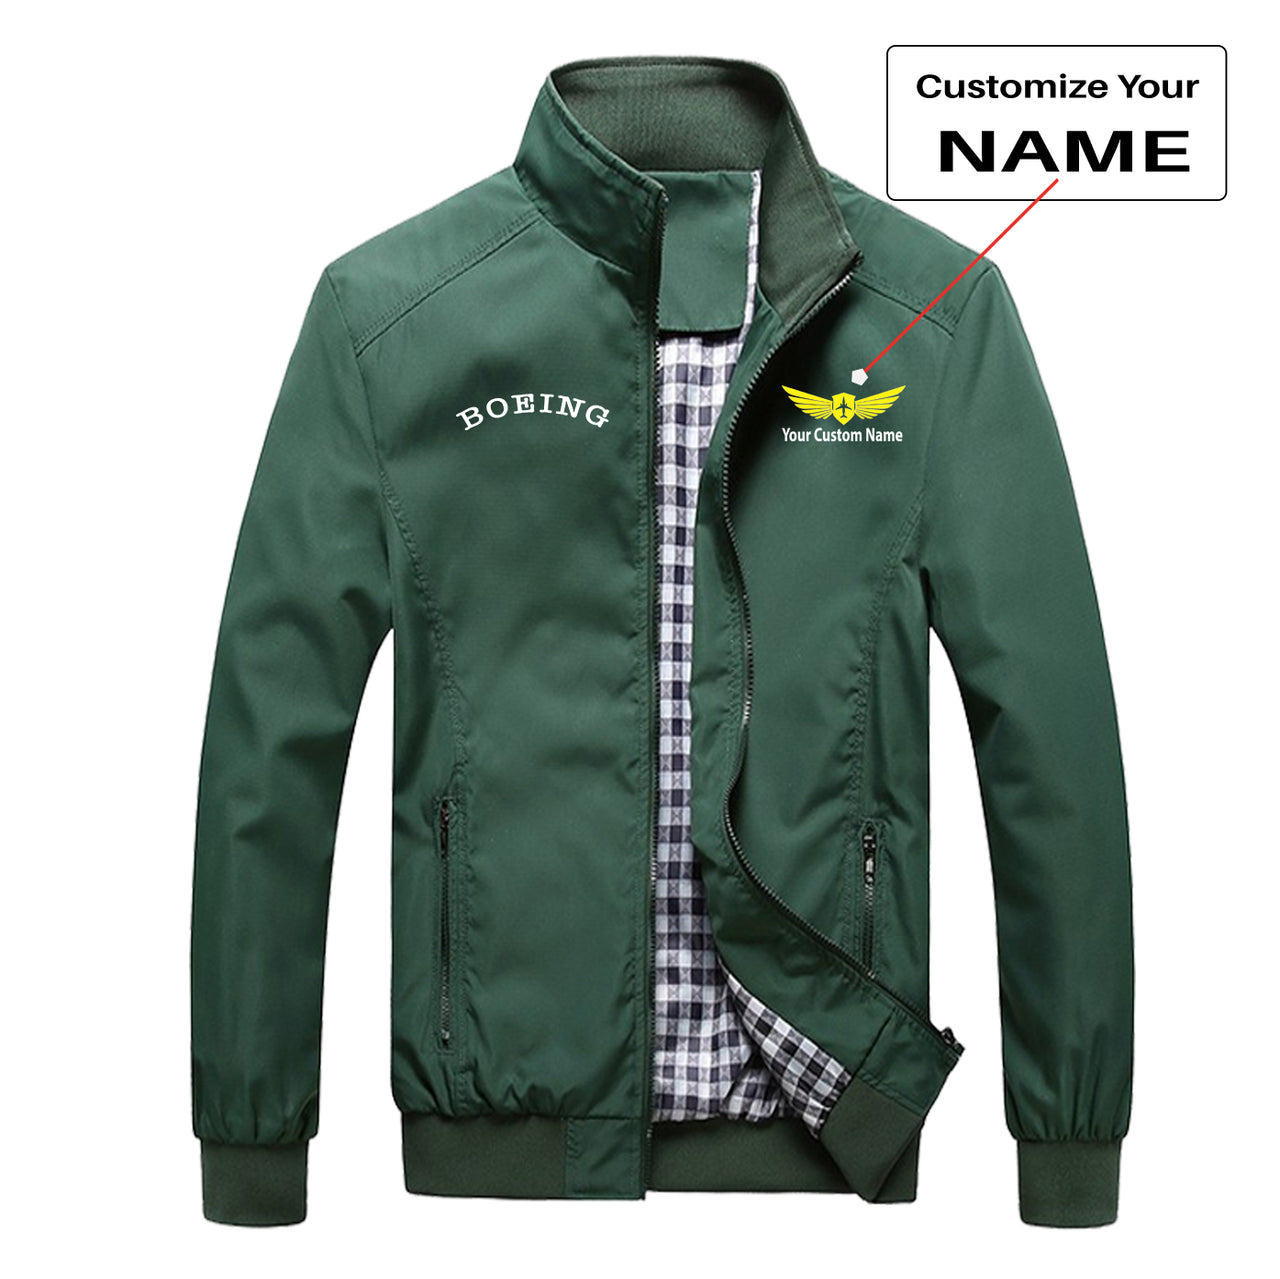 Special BOEING Text Designed Stylish Jackets